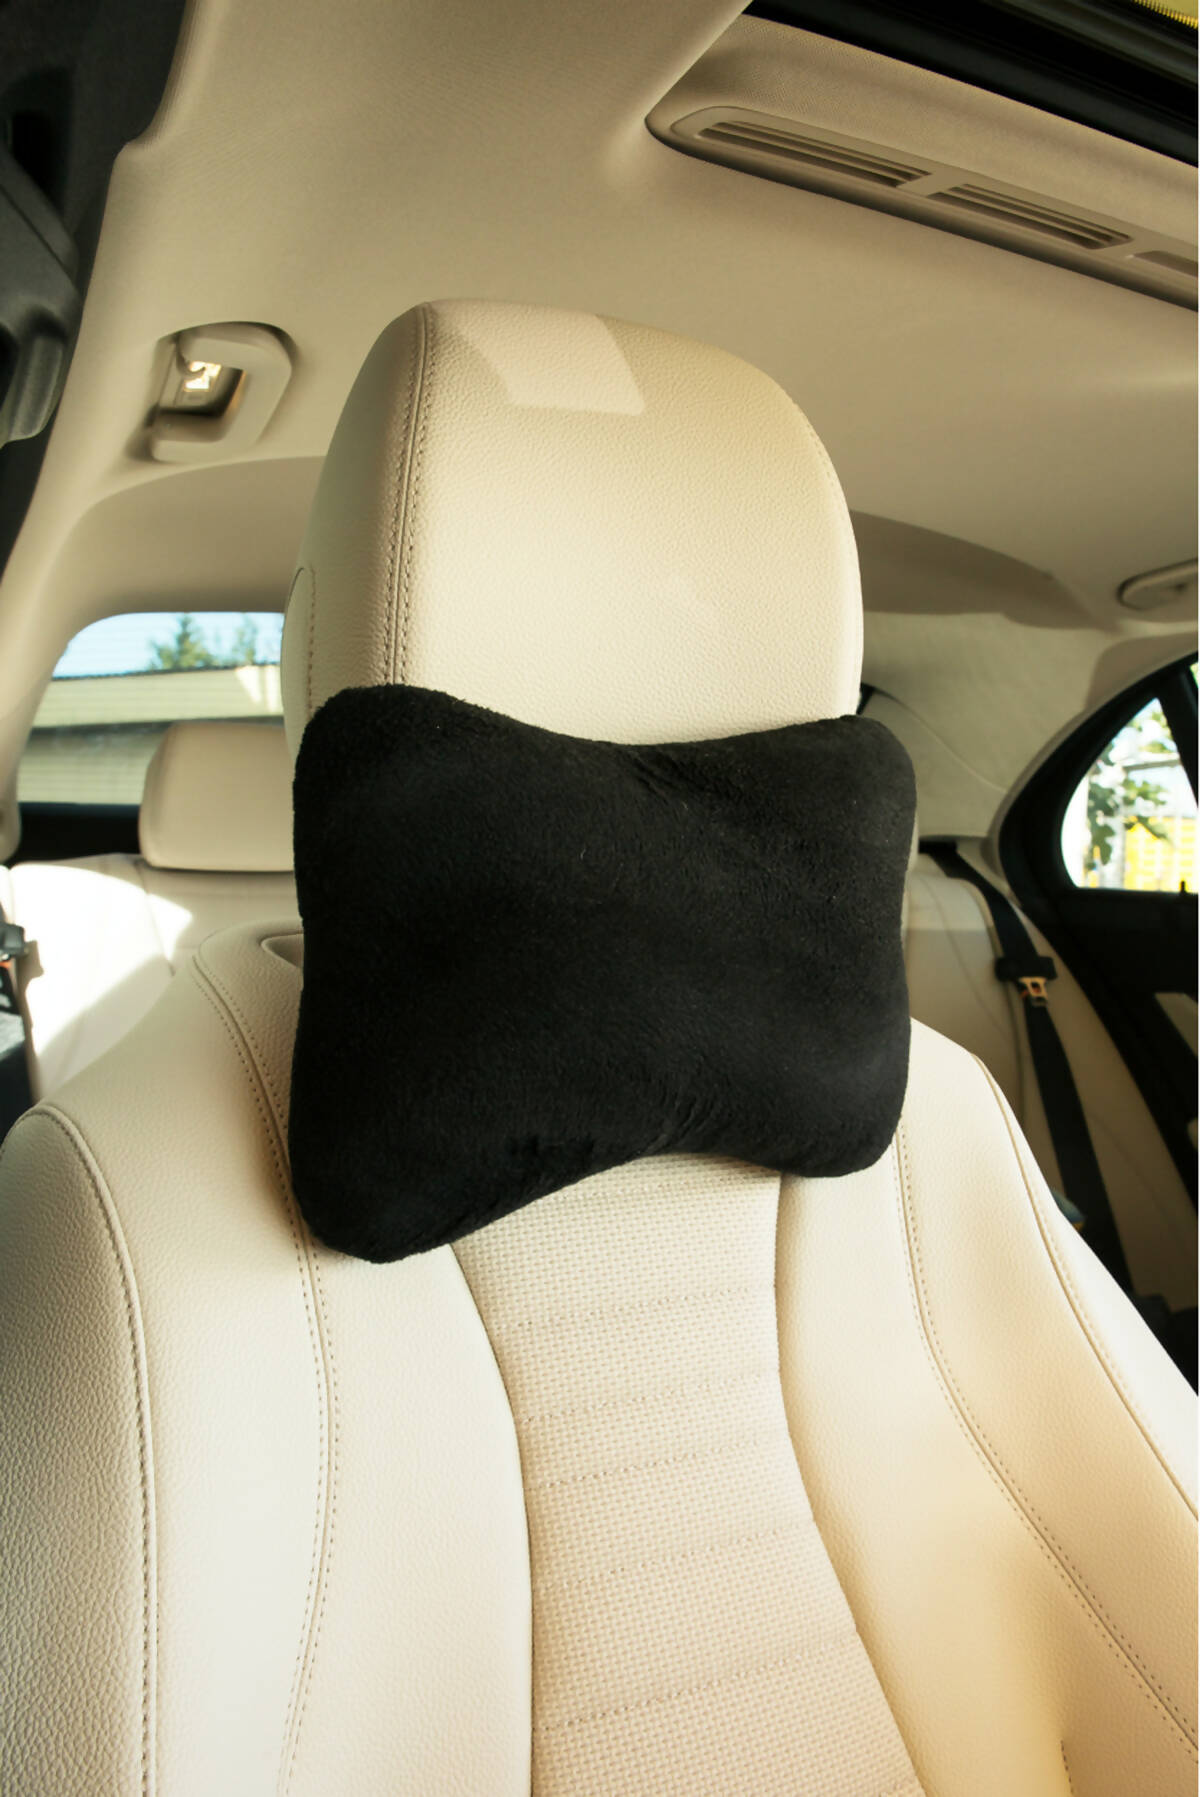 Travel Neck Pillow for Car or SUV, Car Neck Pillow with Elastic Strap, Lower Back Support Pillow, 7" x 11" Soft Personal Size Microfiber Pillow, Butterfly Shape Car Pillow - Wear Sierra